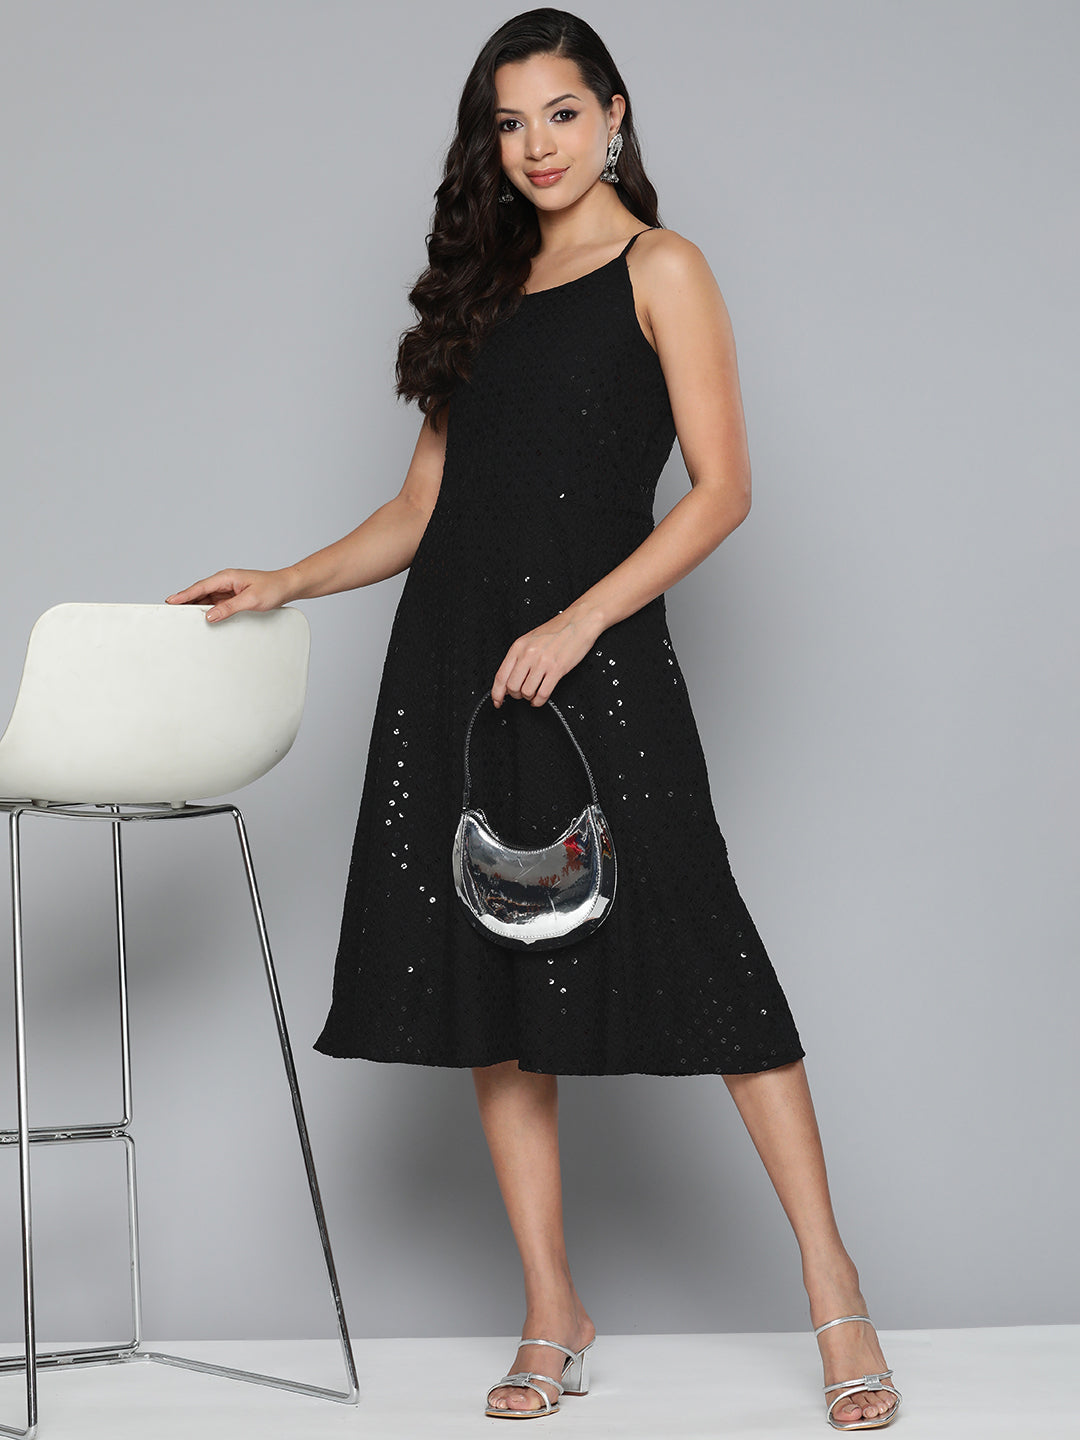 Jompers Black Floral Sequin Embroidered A-Line Midi Dress